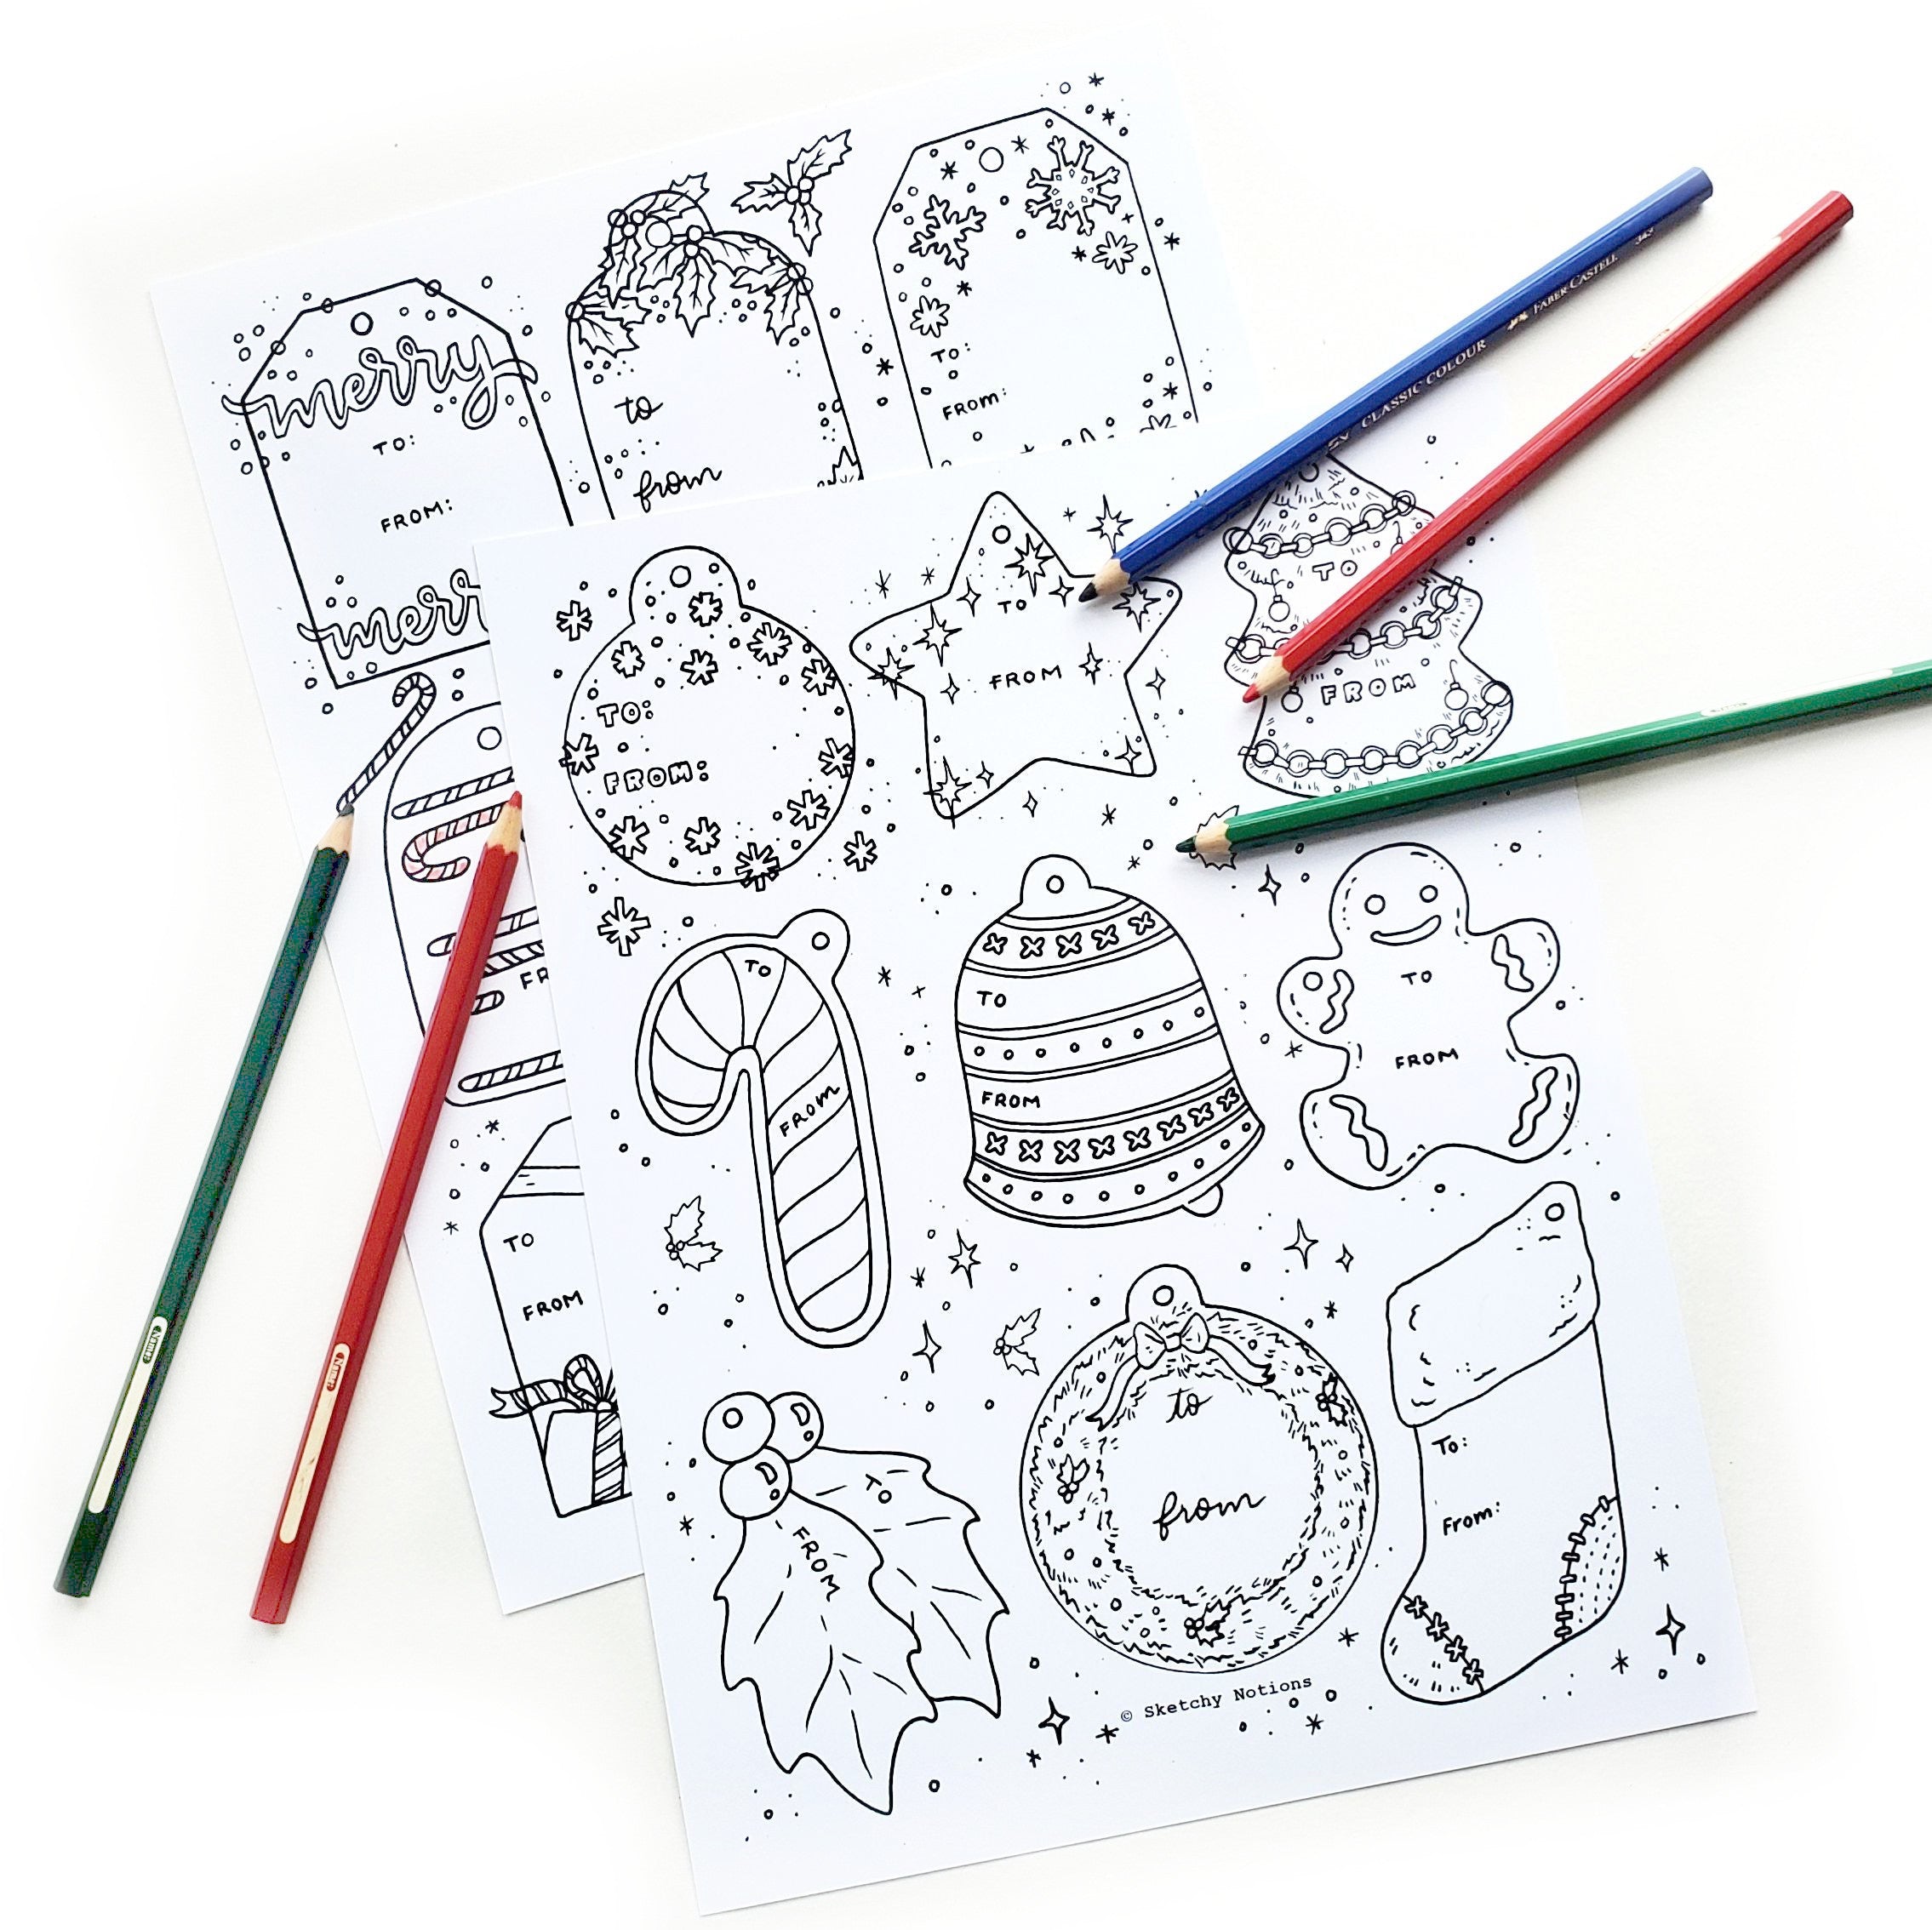 Top 25 Christmas Coloring Books Postcards Gift Tags for Adults